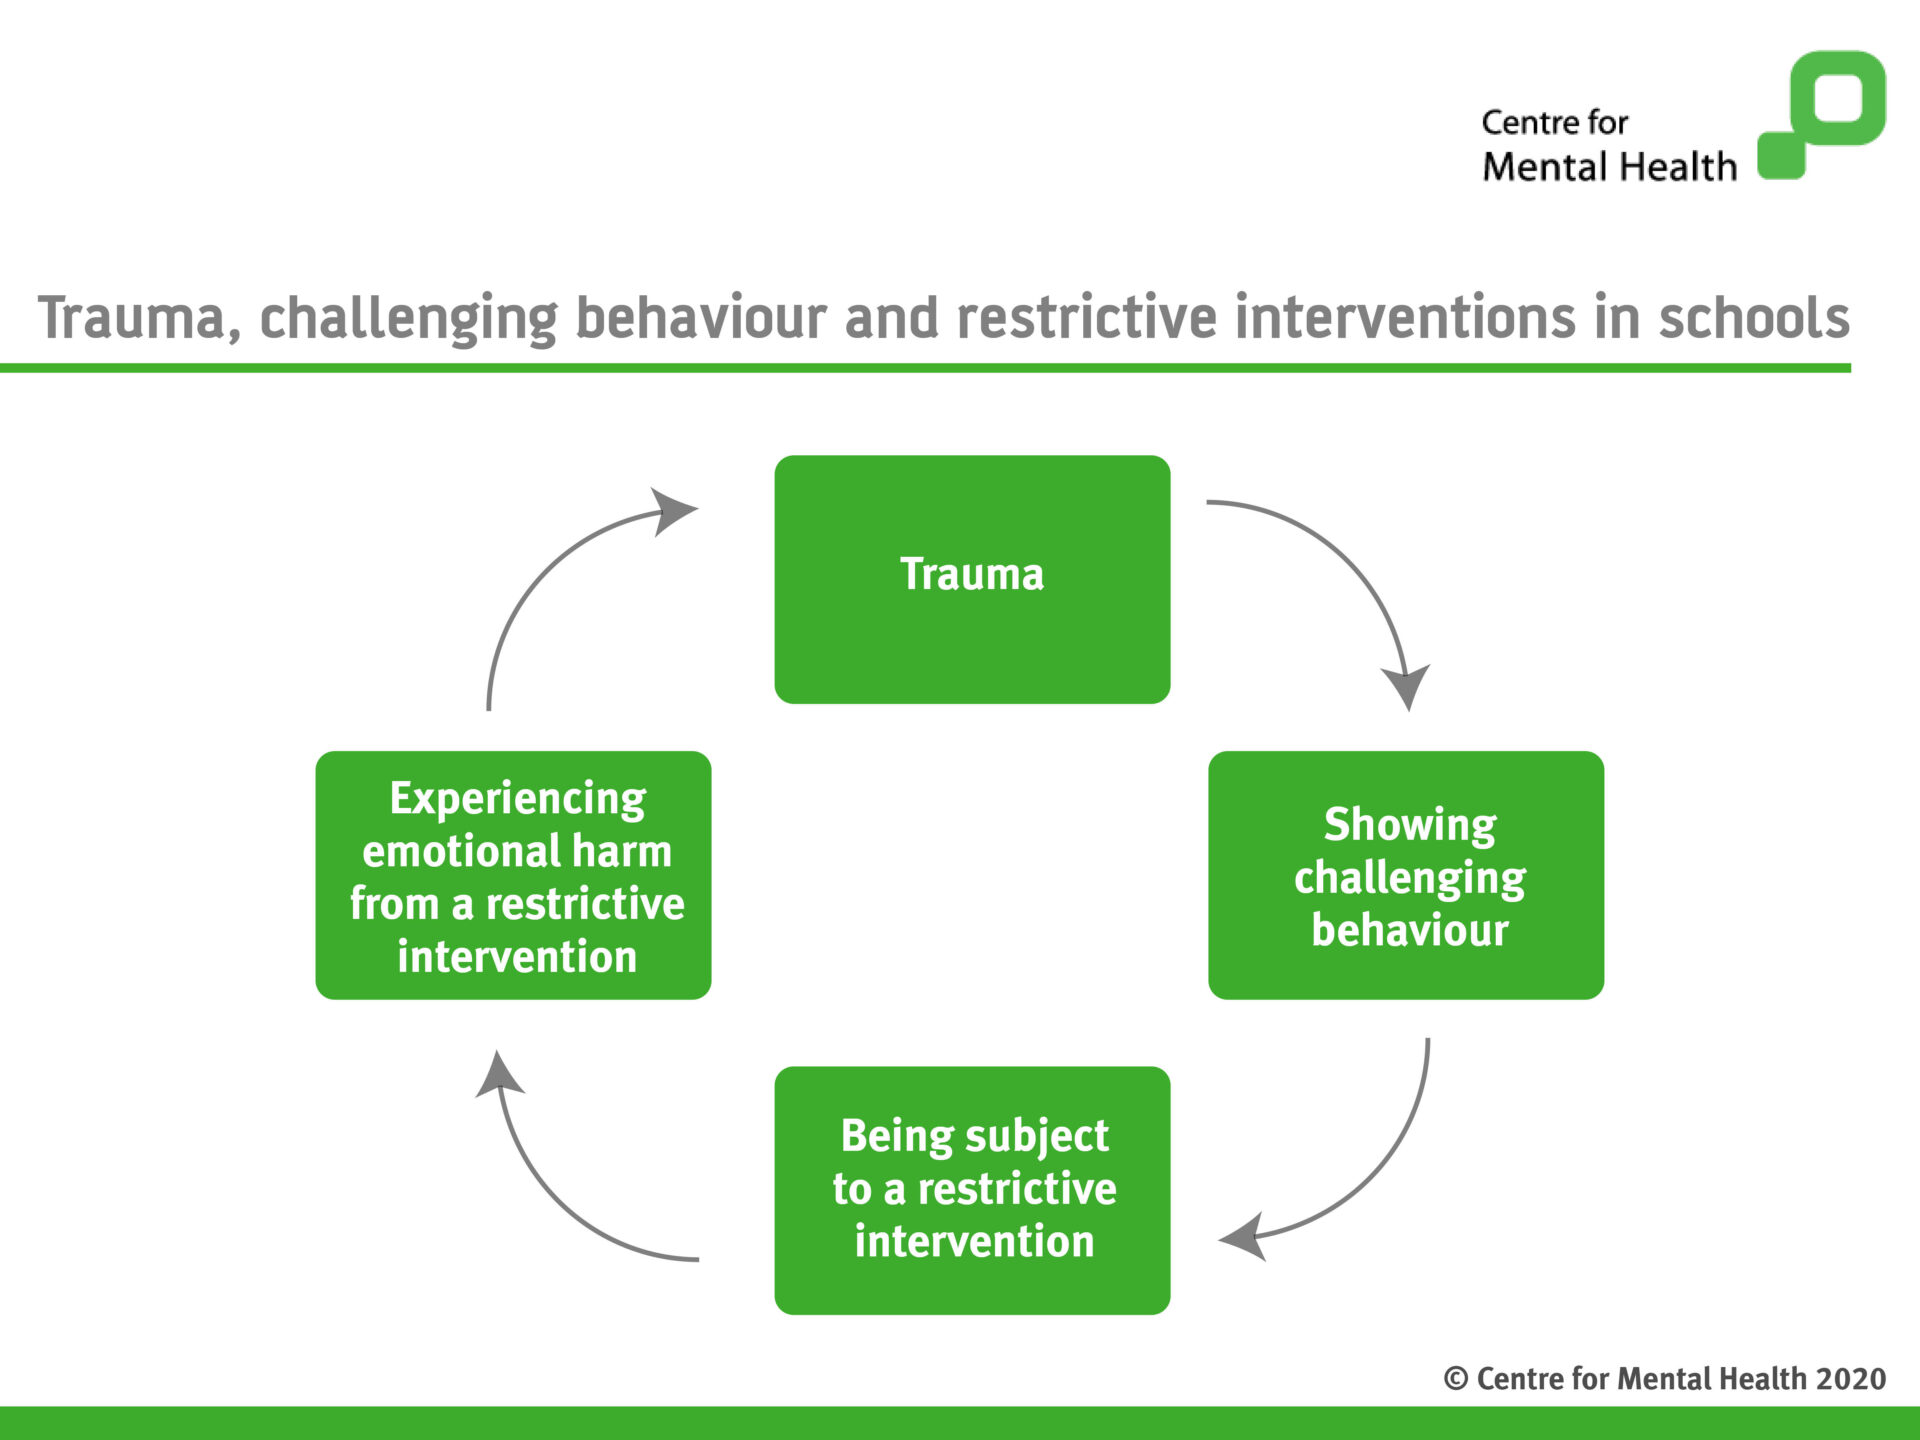 Diagram showing the vicious cycle trauma, challenging behaviour and restrictive interventions in schools: trauma > showing challenging behaviour > being subject to a restrictive intervention > experiencing emotional harm from a restrictive intervention > trauma